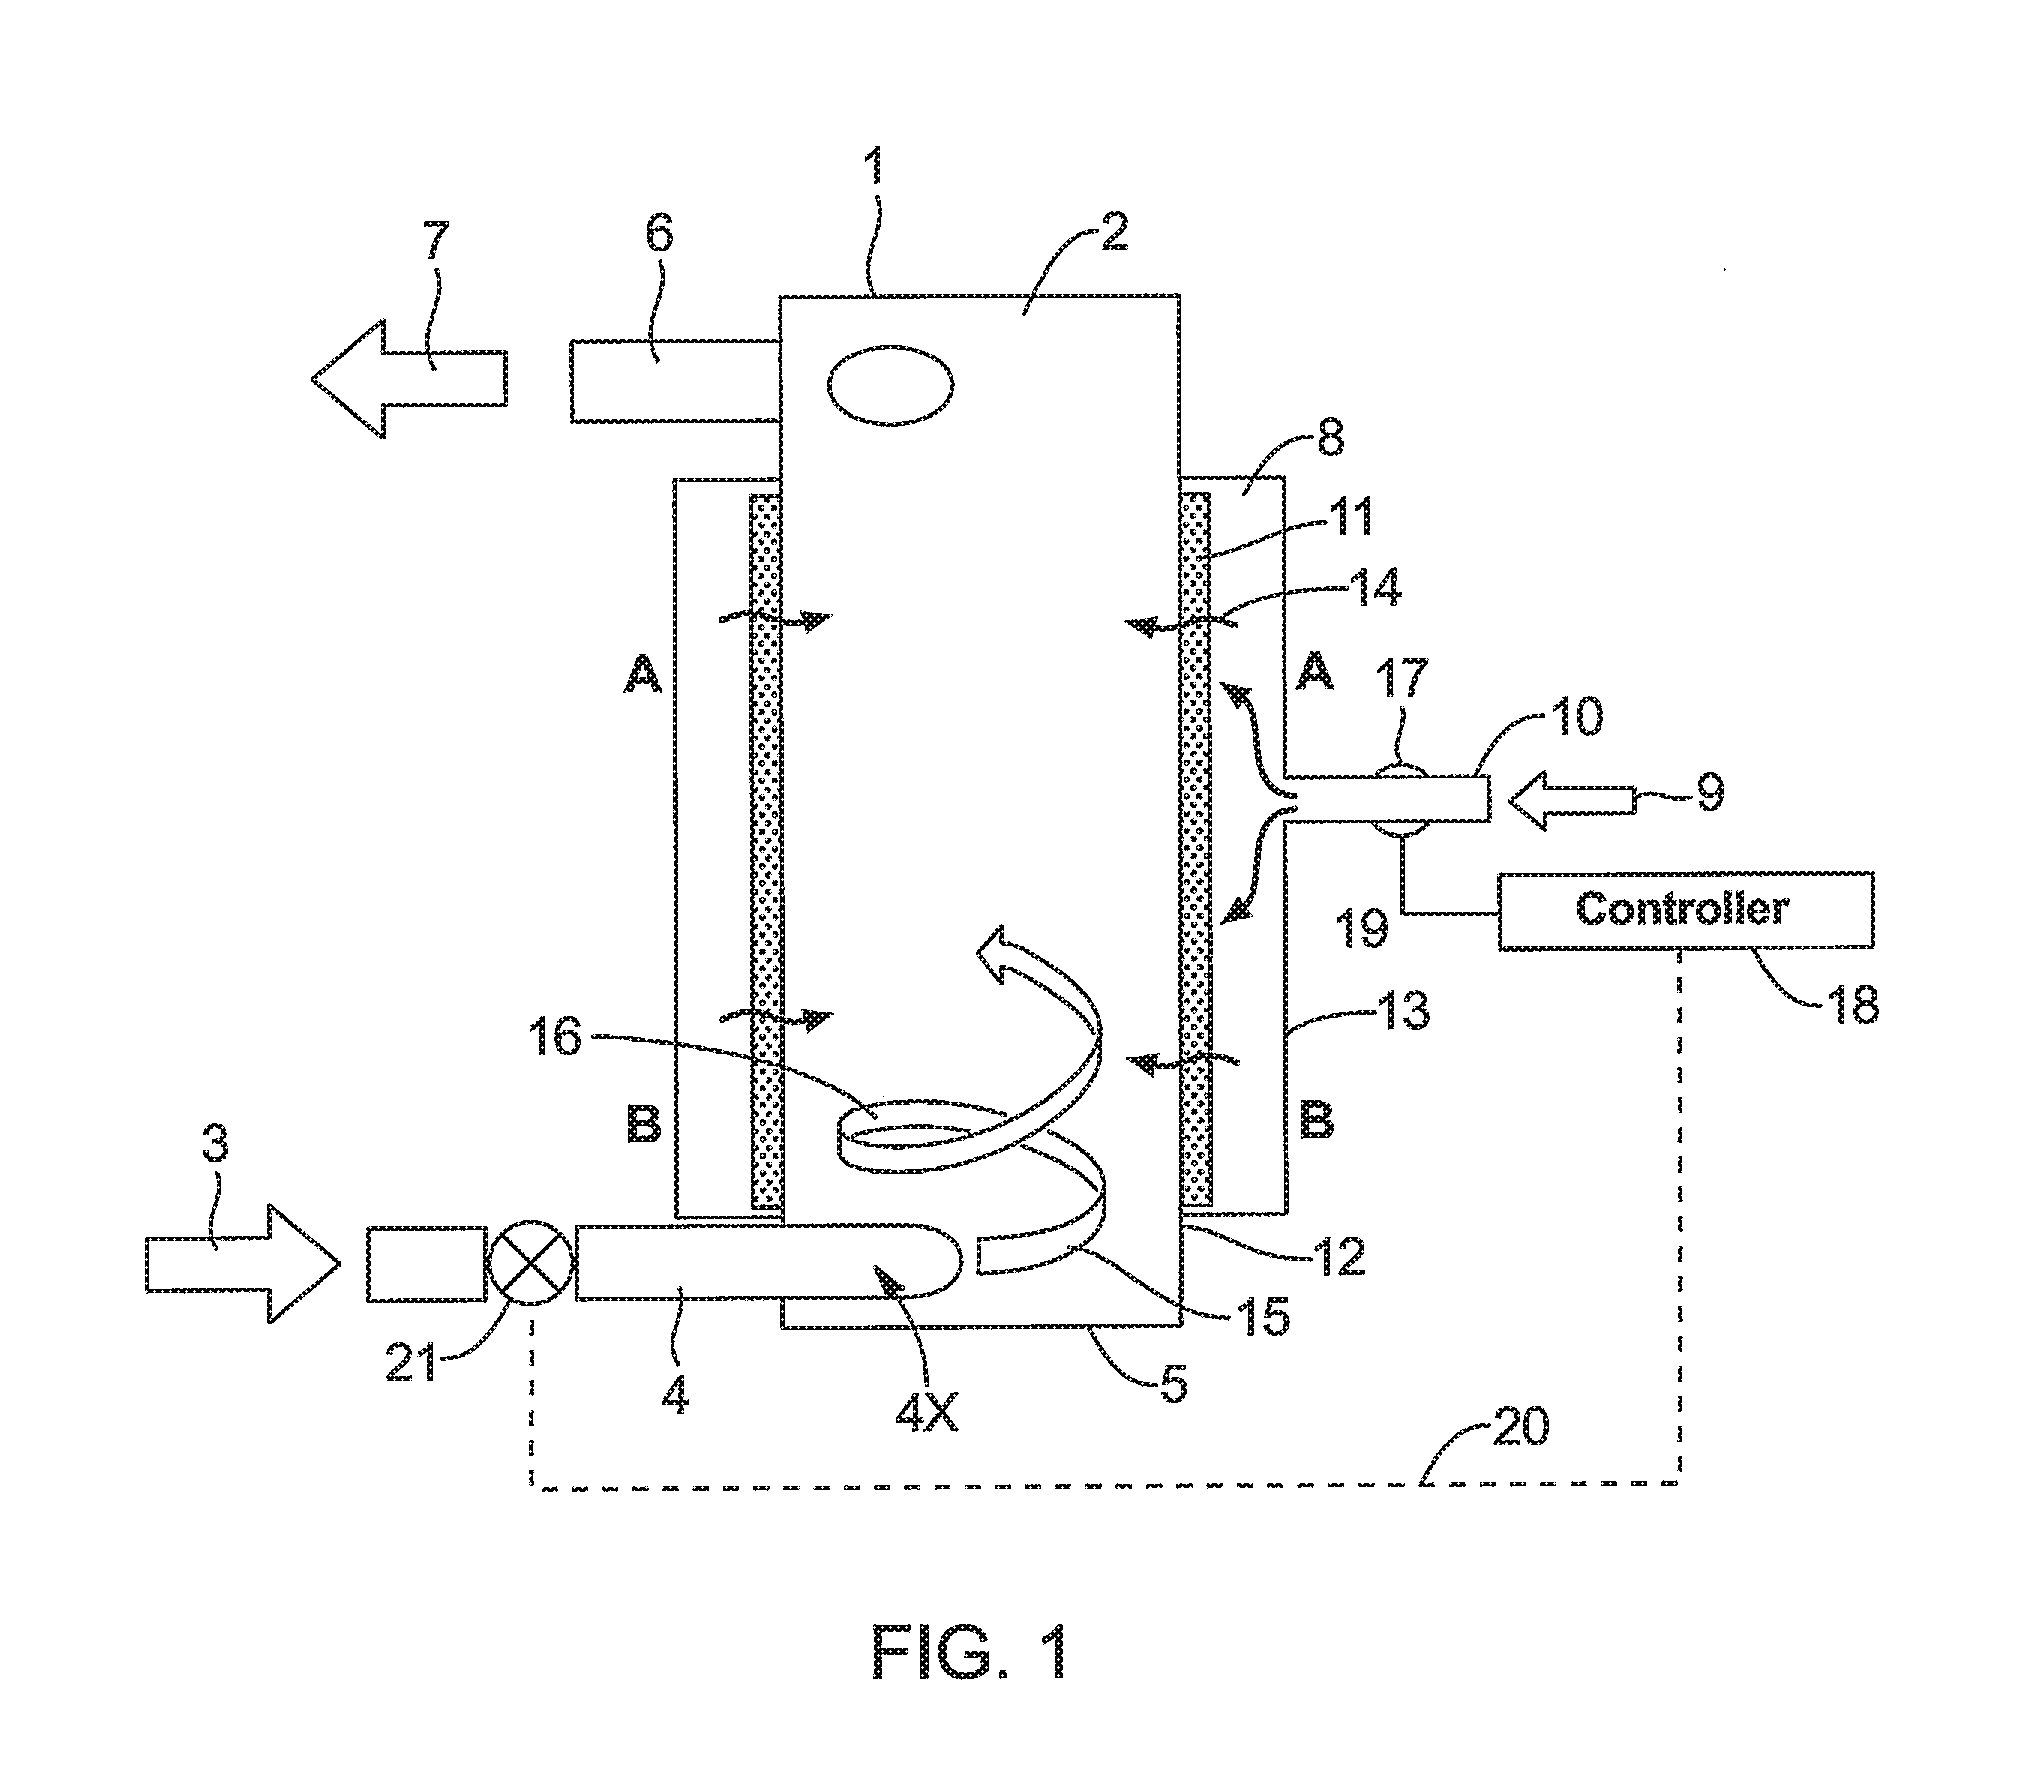 Systems and methods for diffusing gas into a liquid